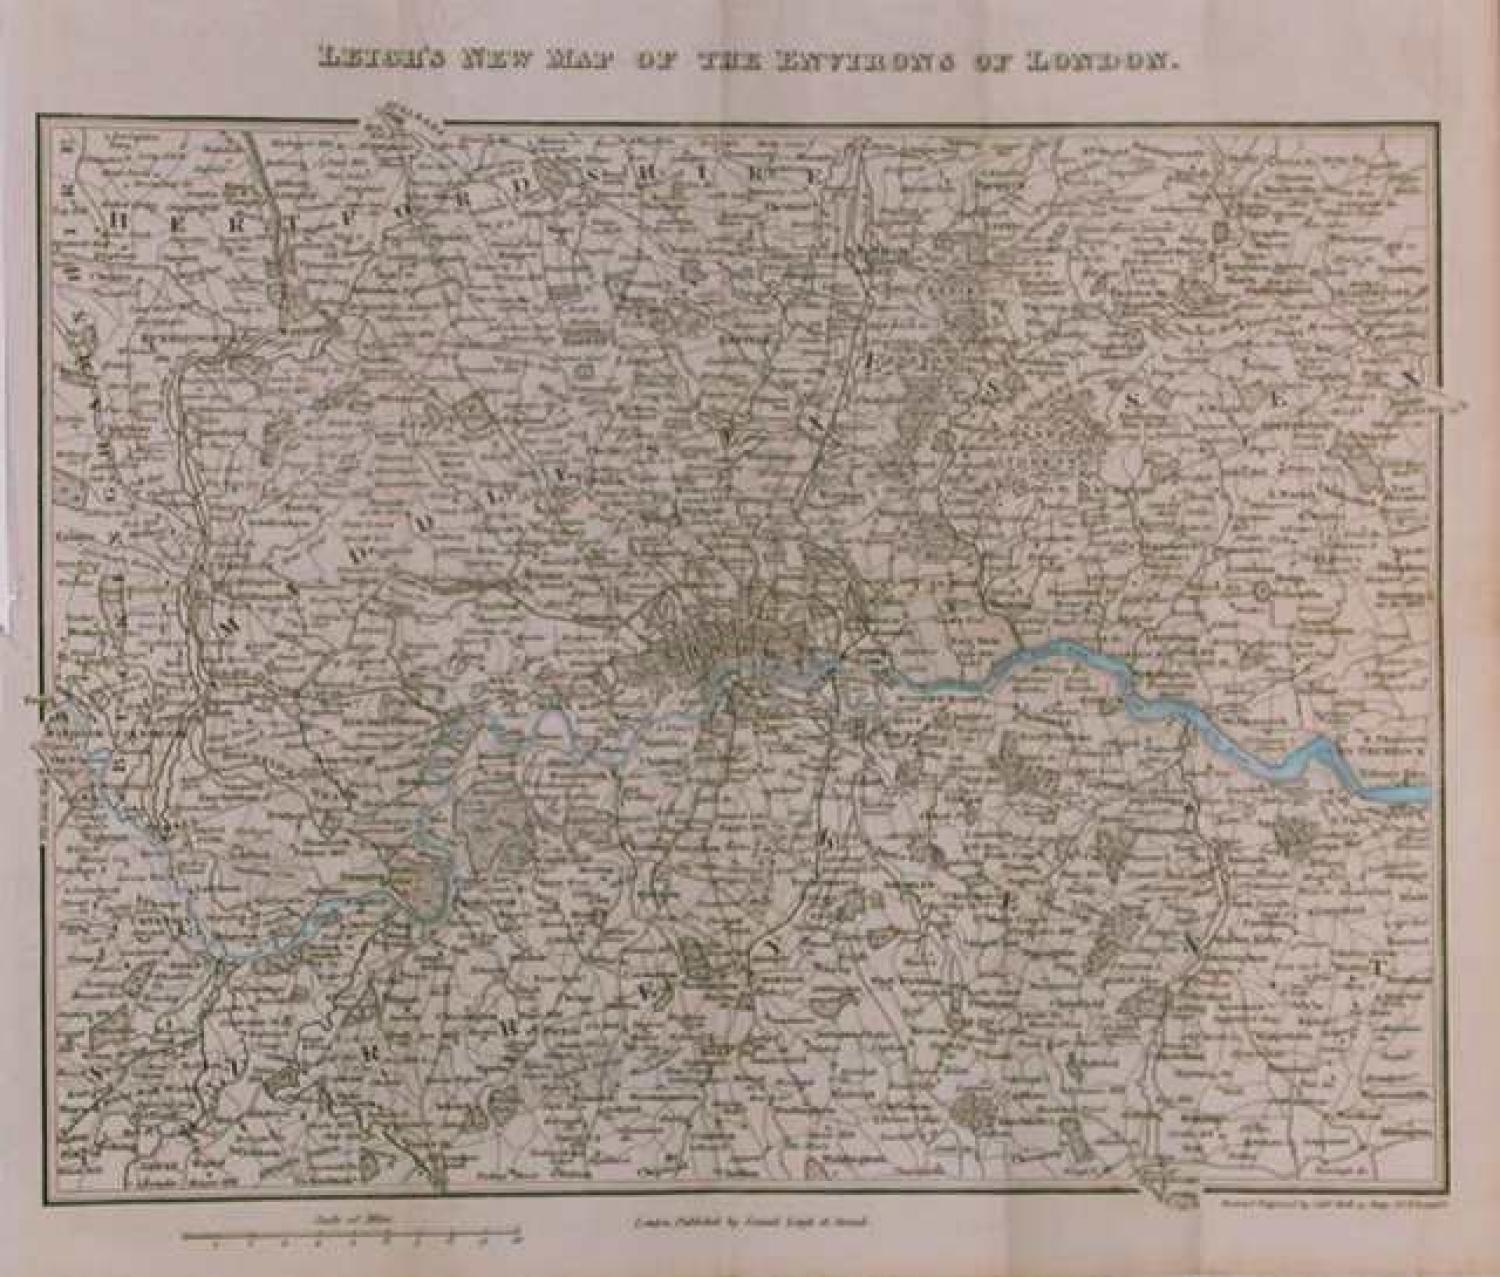 SOLD Leigh's New Map of the Environs of London